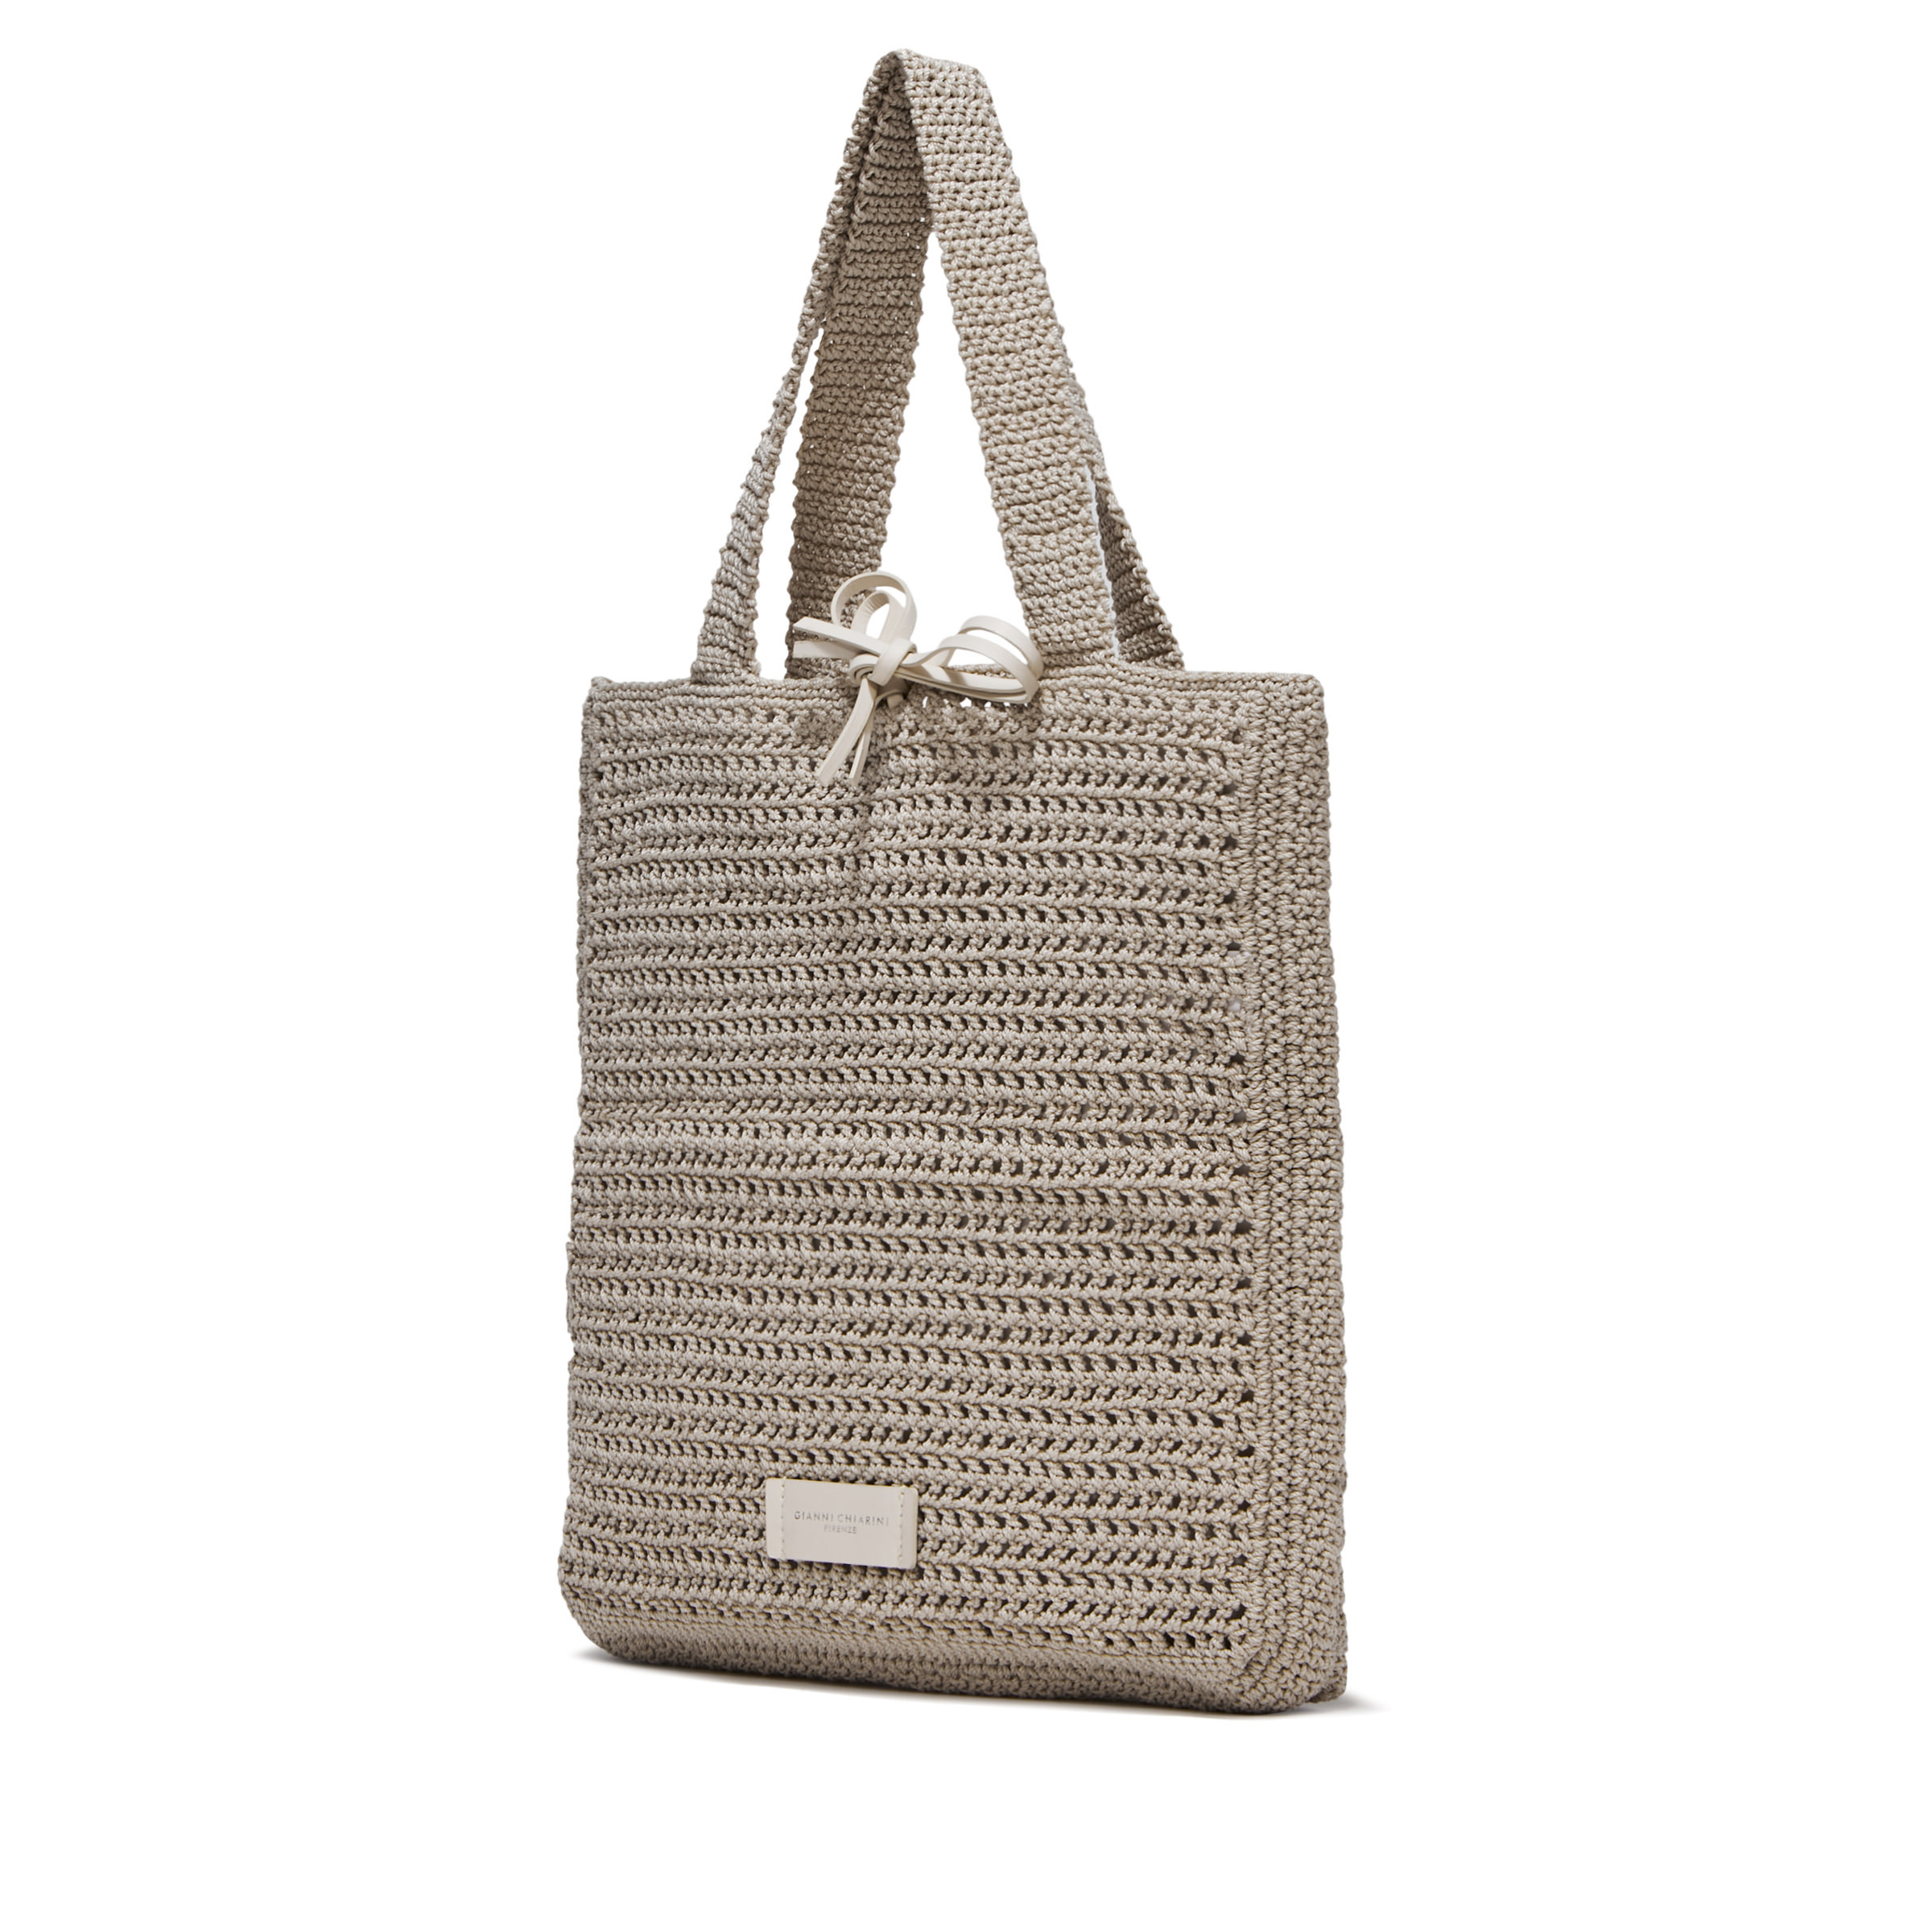 Gianni Chiarini - Victoria bag in leather and fabric, Pearl Grey, large image number 3